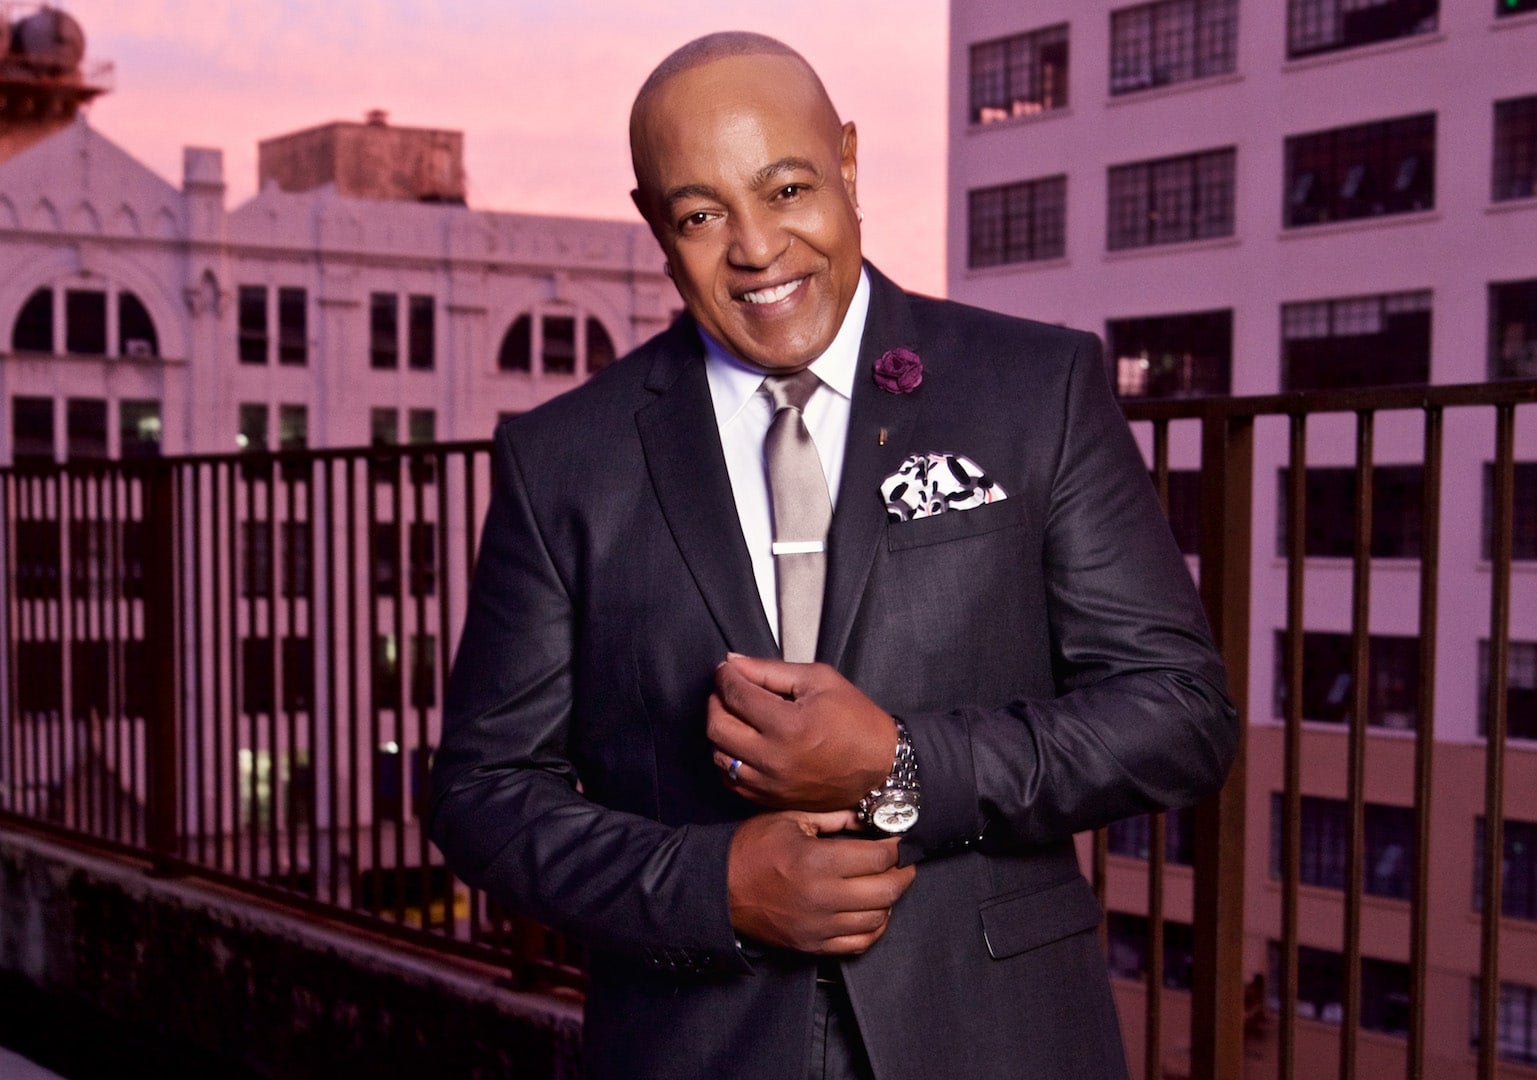 Peabo Bryson 'Improving Rapidly' After Suffering Heart Attack, Rep Says